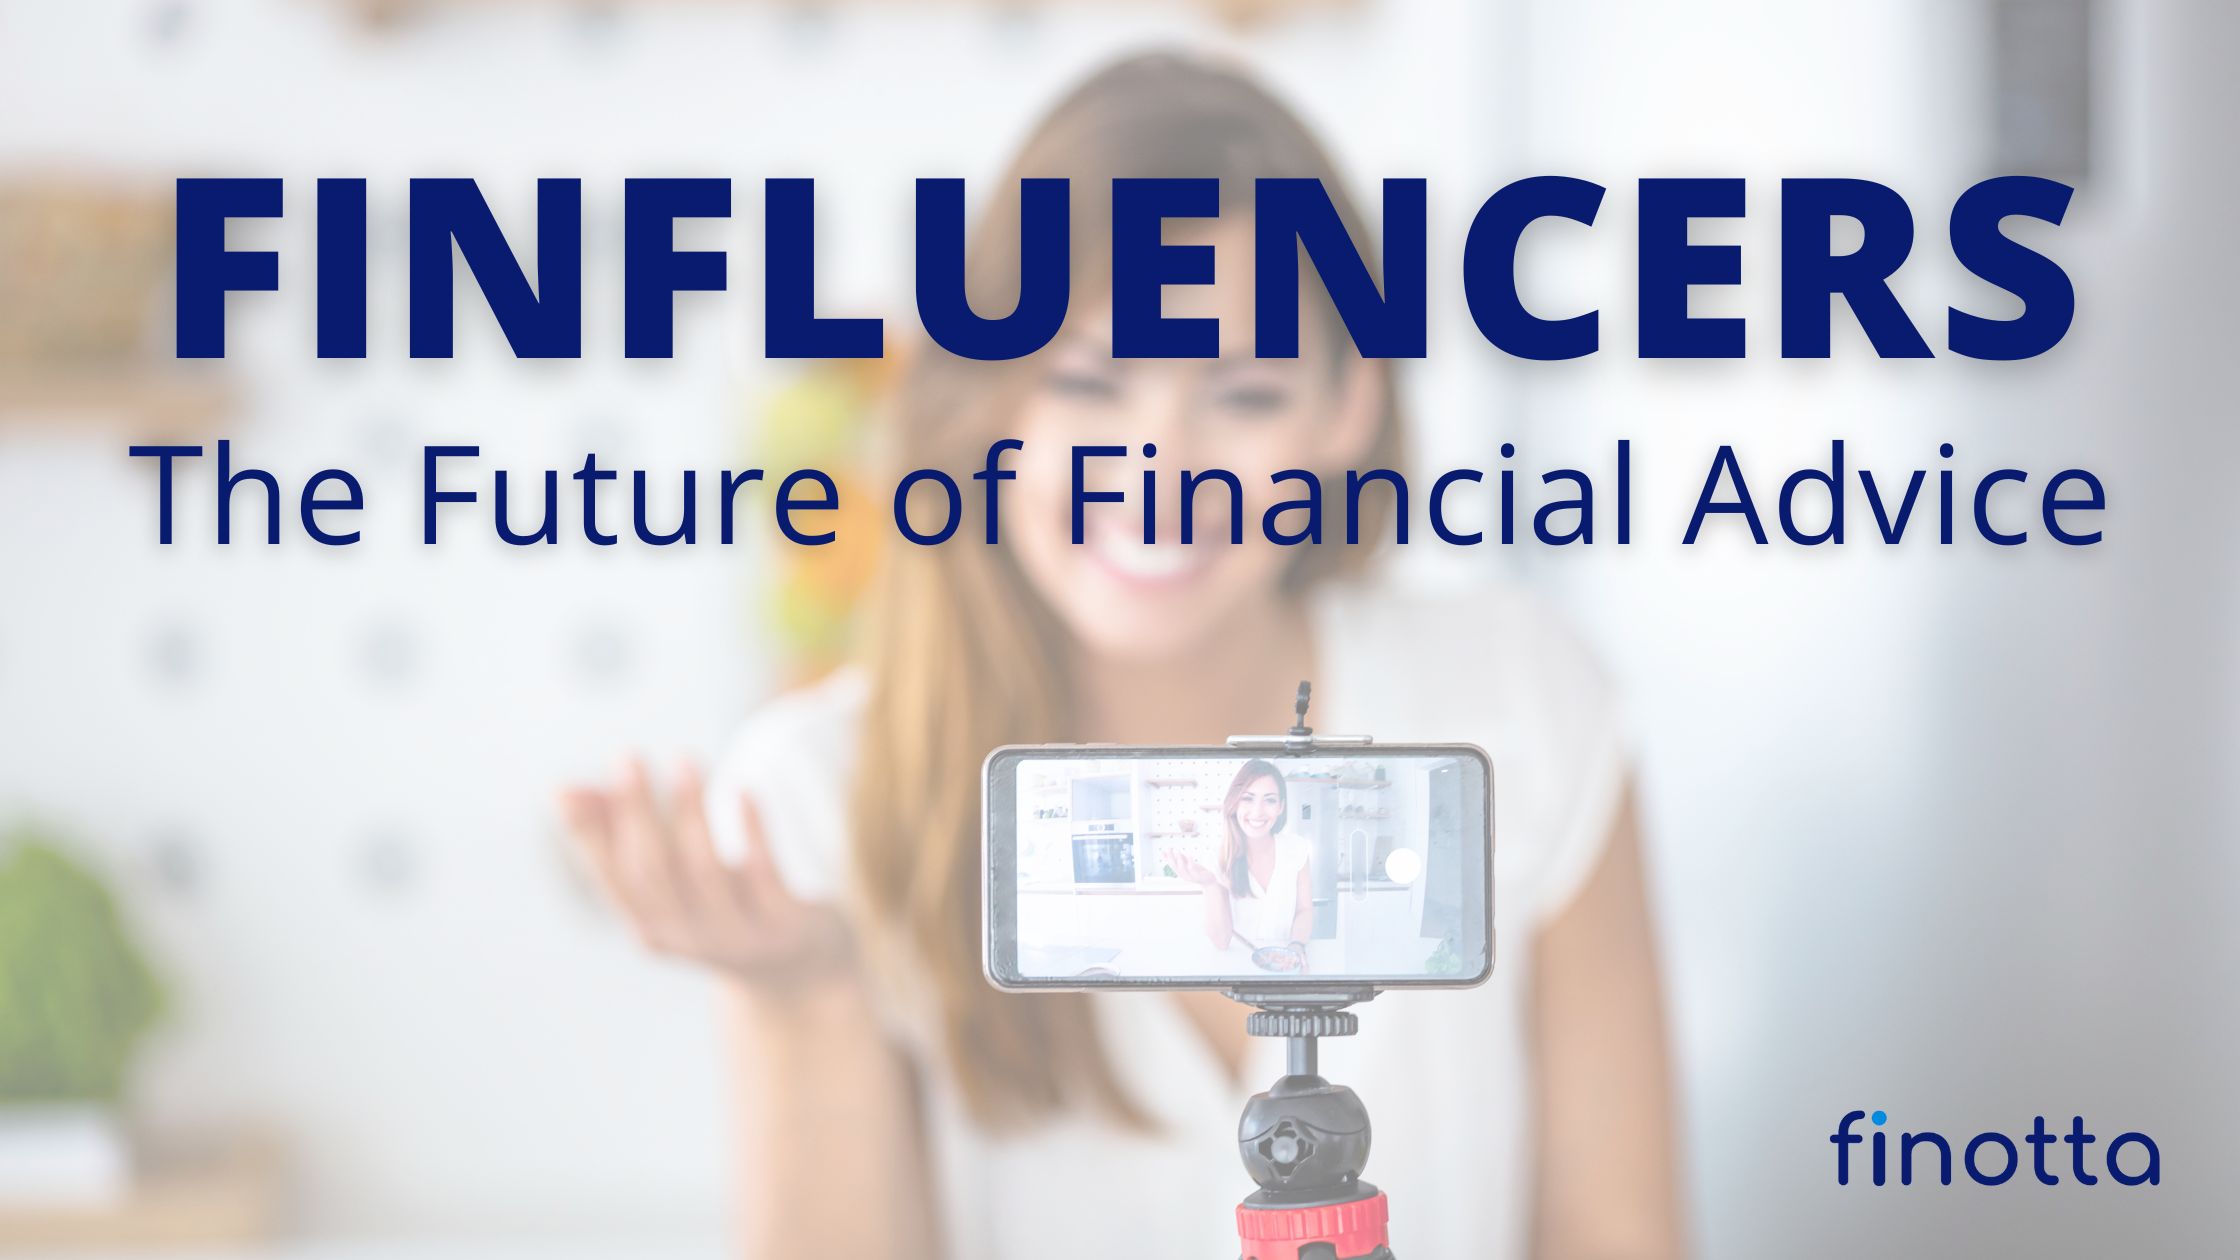 Finfluencers: The Future of Financial Advice